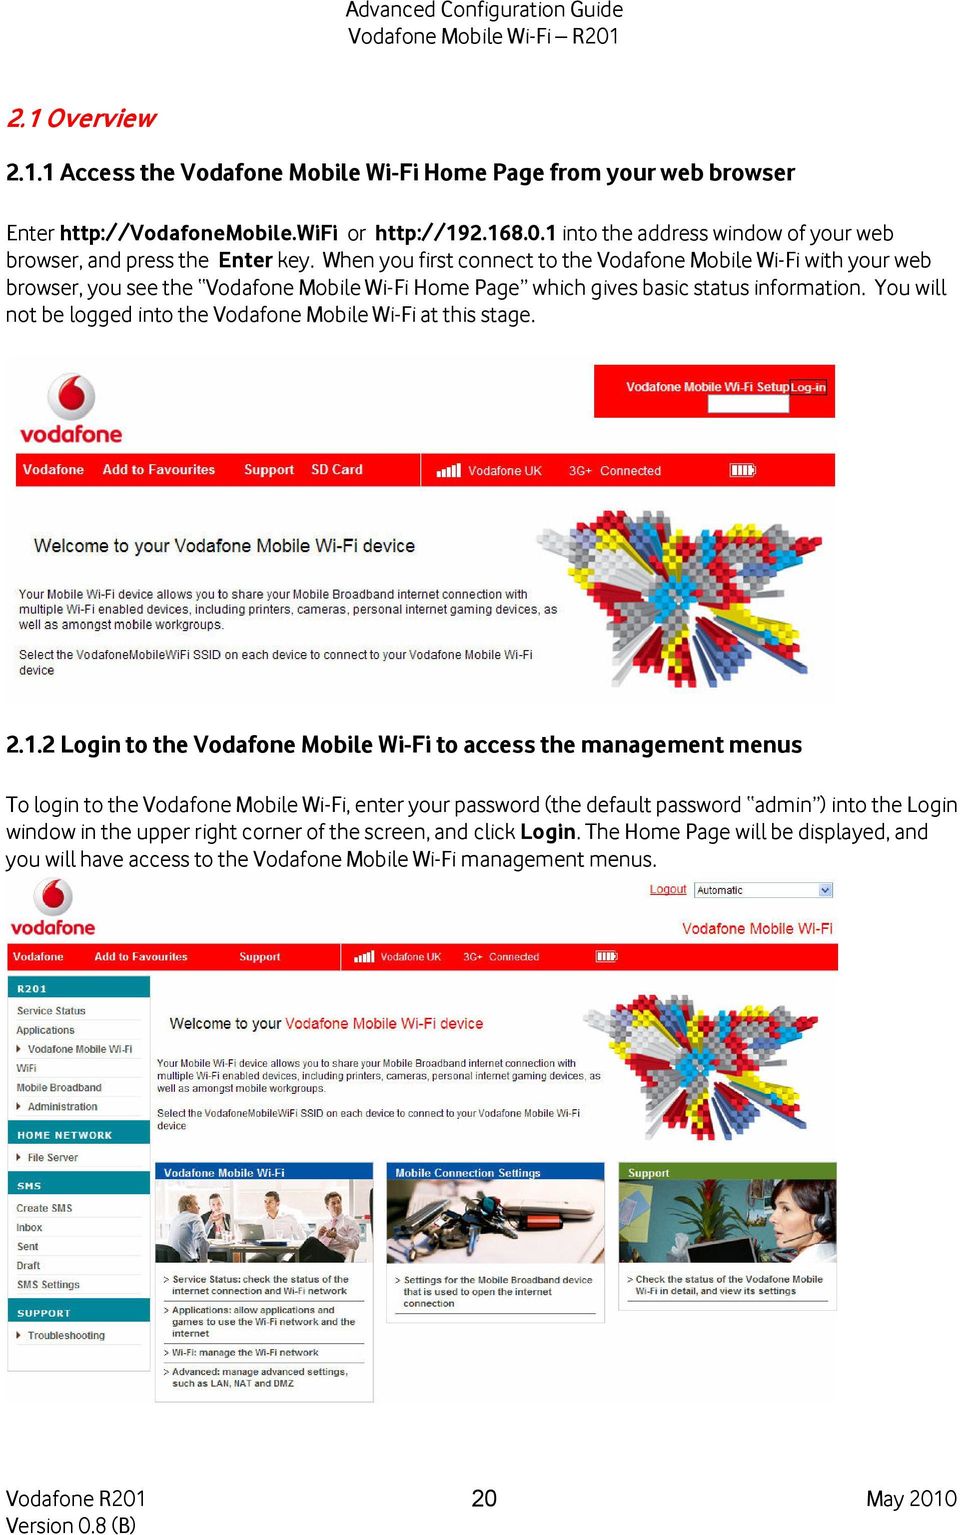 When you first connect to the Vodafone Mobile Wi-Fi with your web browser, you see the Vodafone Mobile Wi-Fi Home Page which gives basic status information.